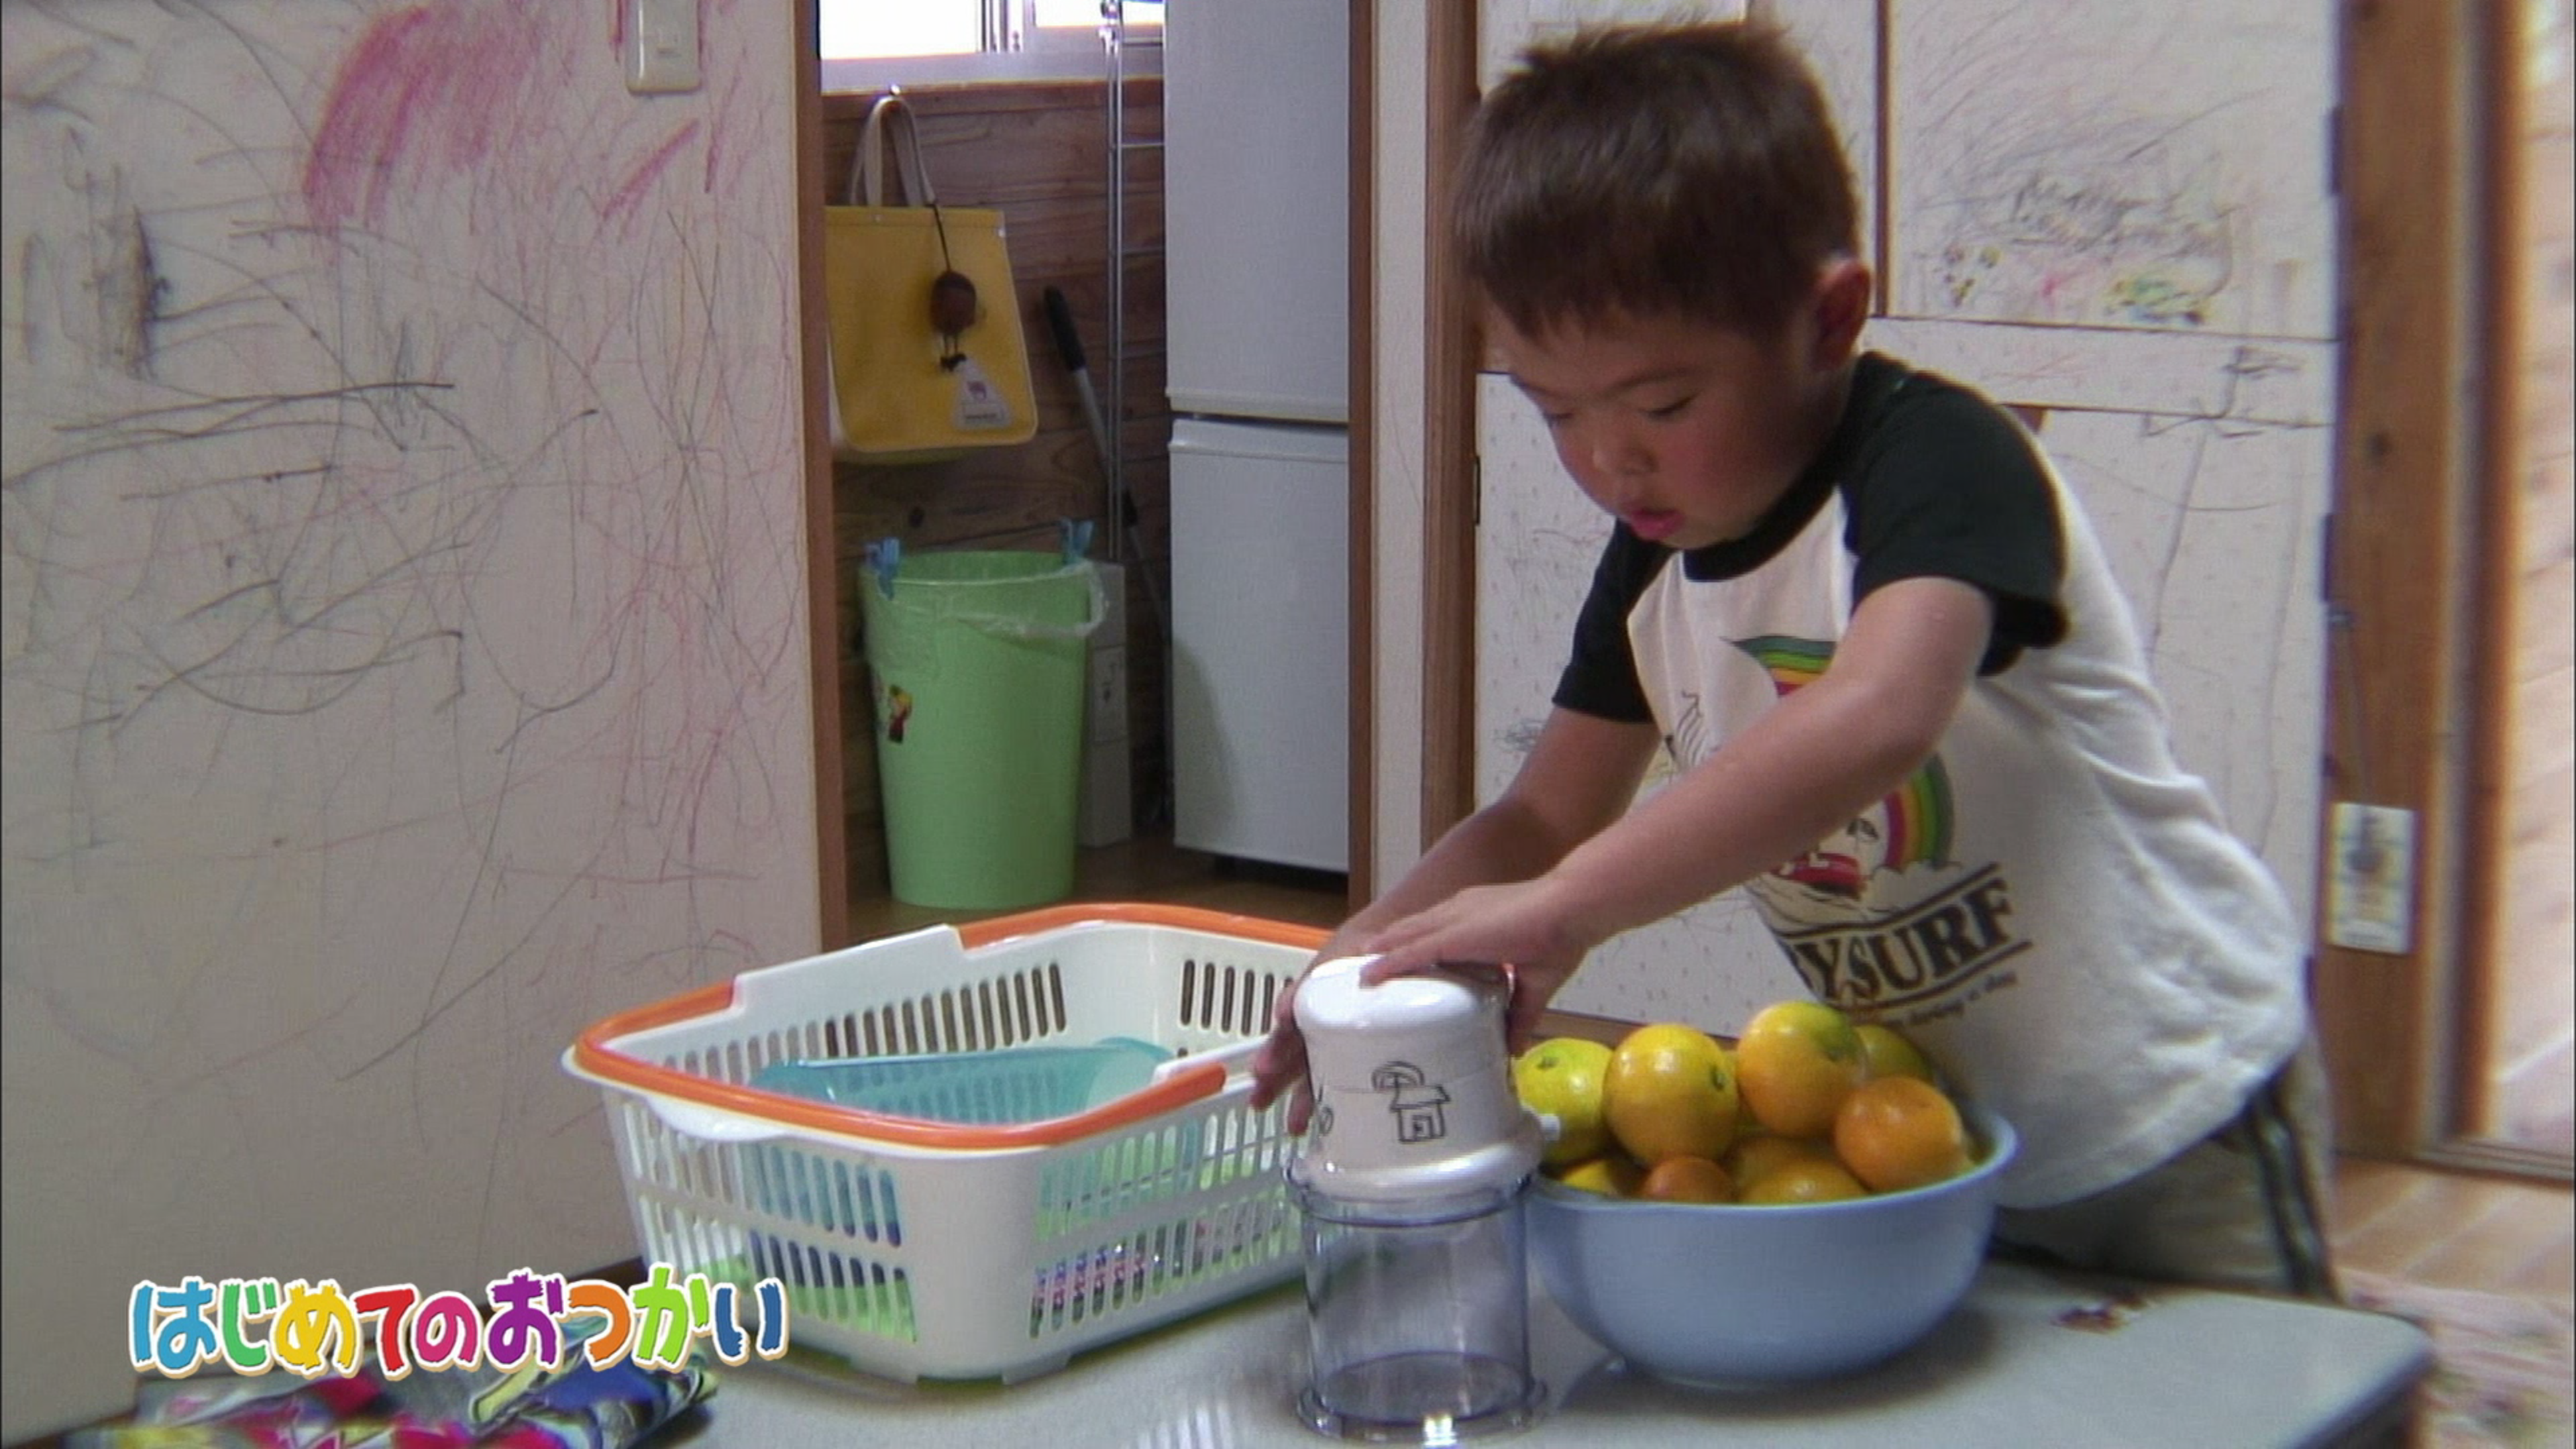 Small boy juices oranges with a juicer.